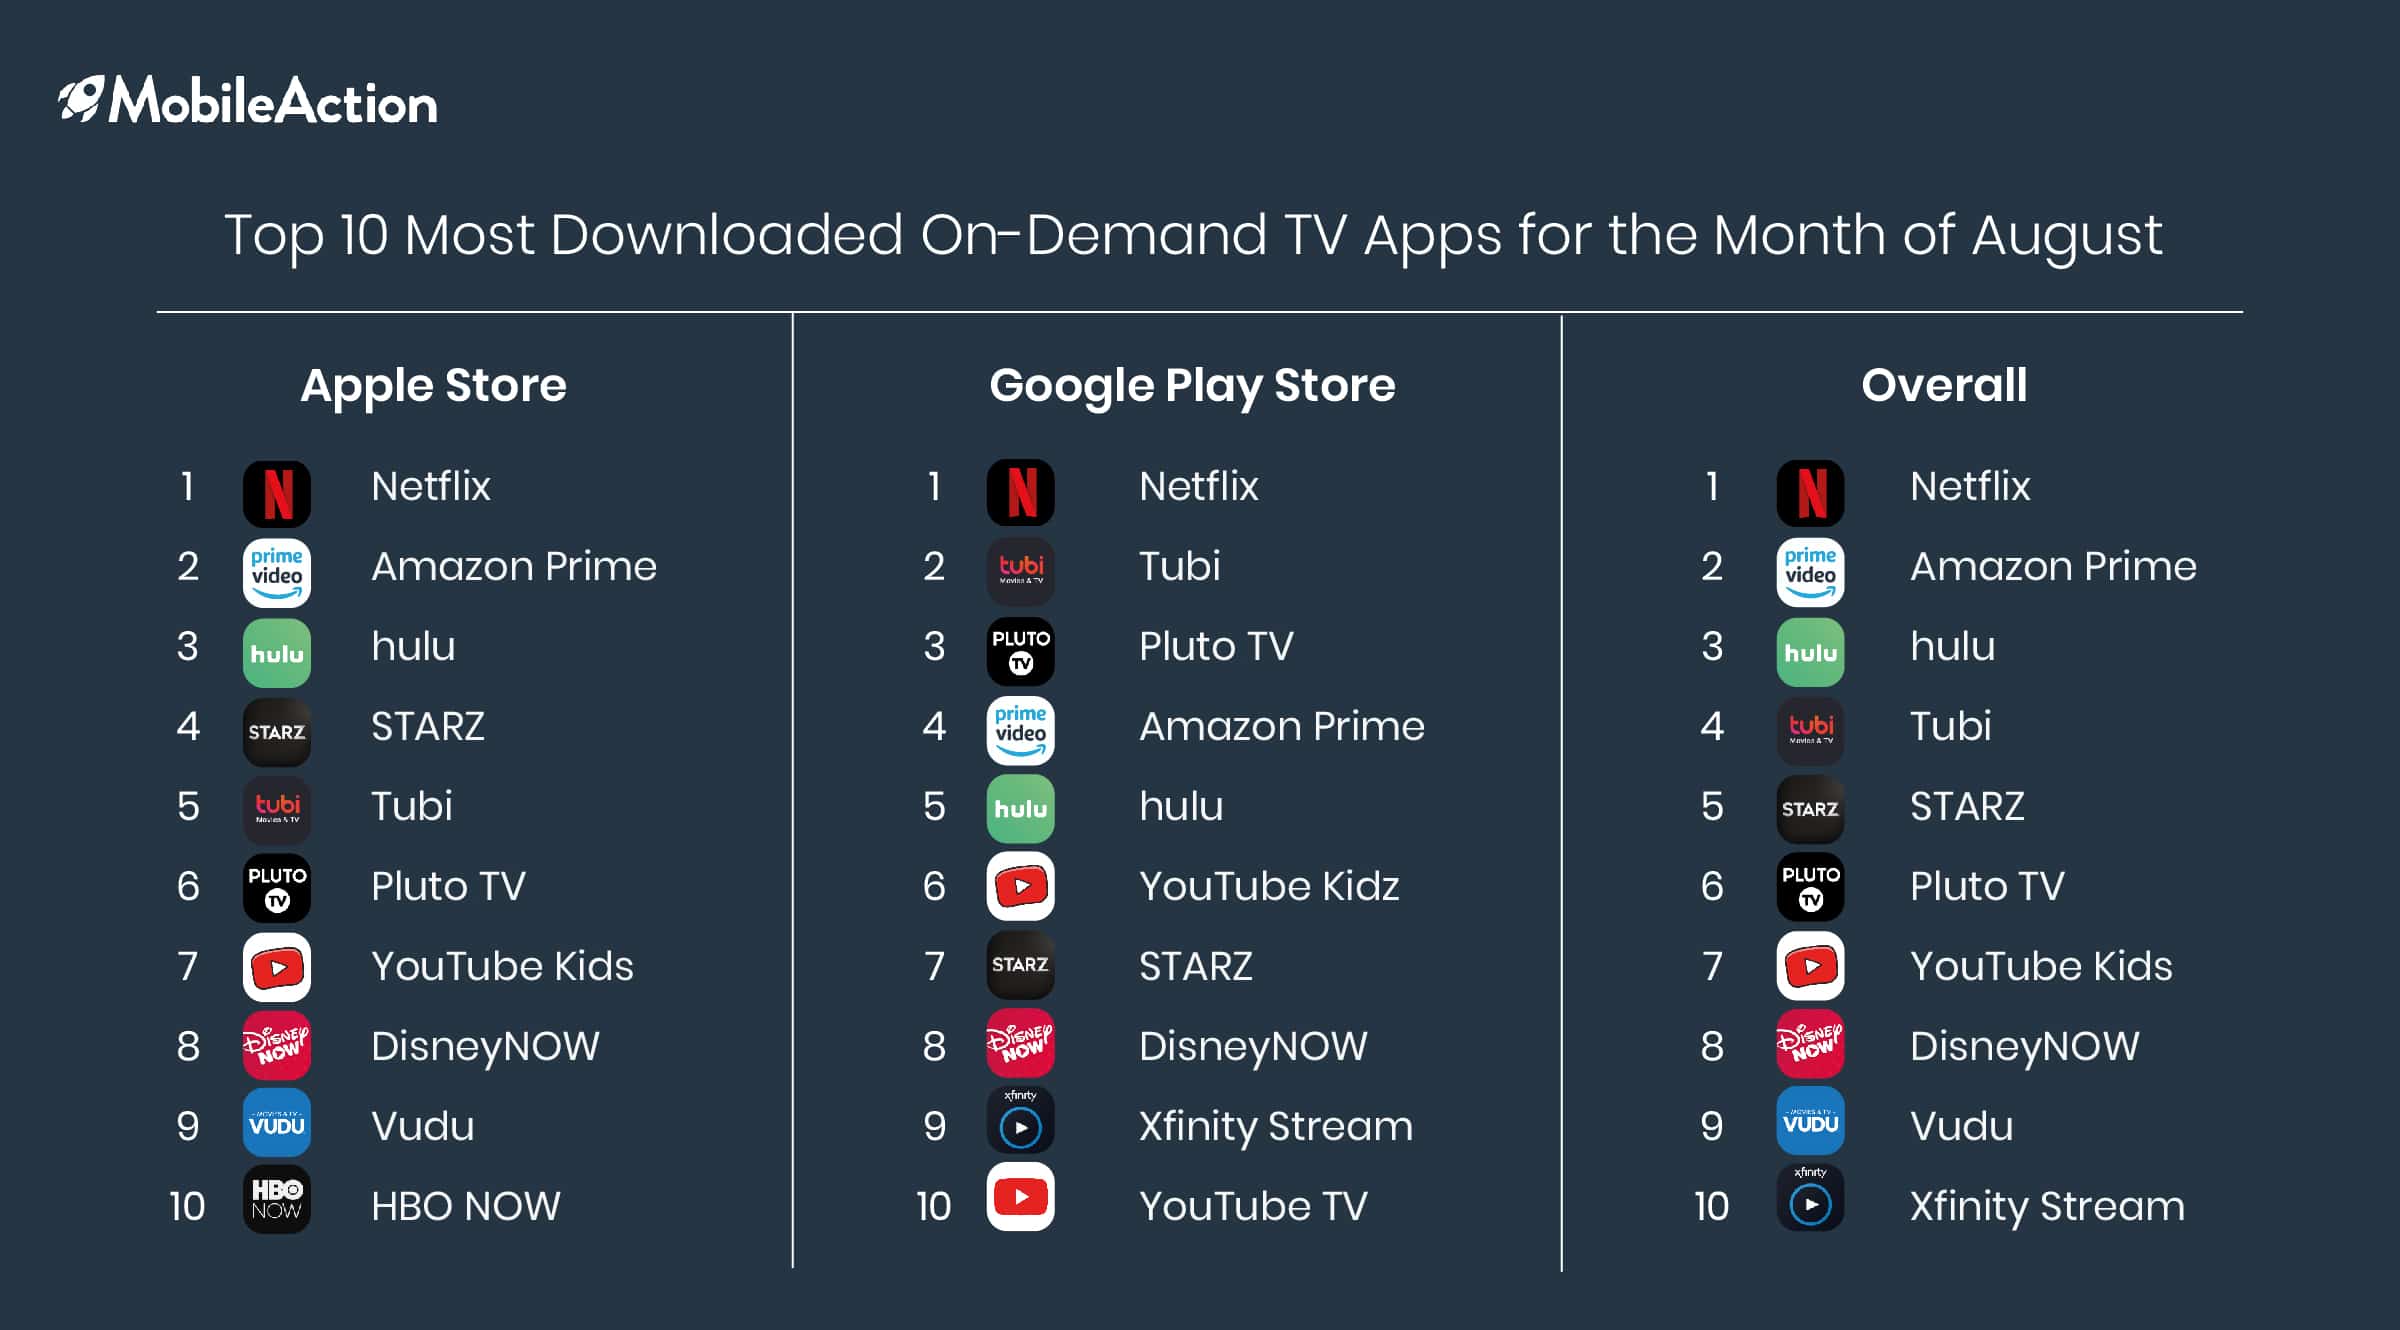 Top 10 On-Demand TV Apps Worldwide for August 2019